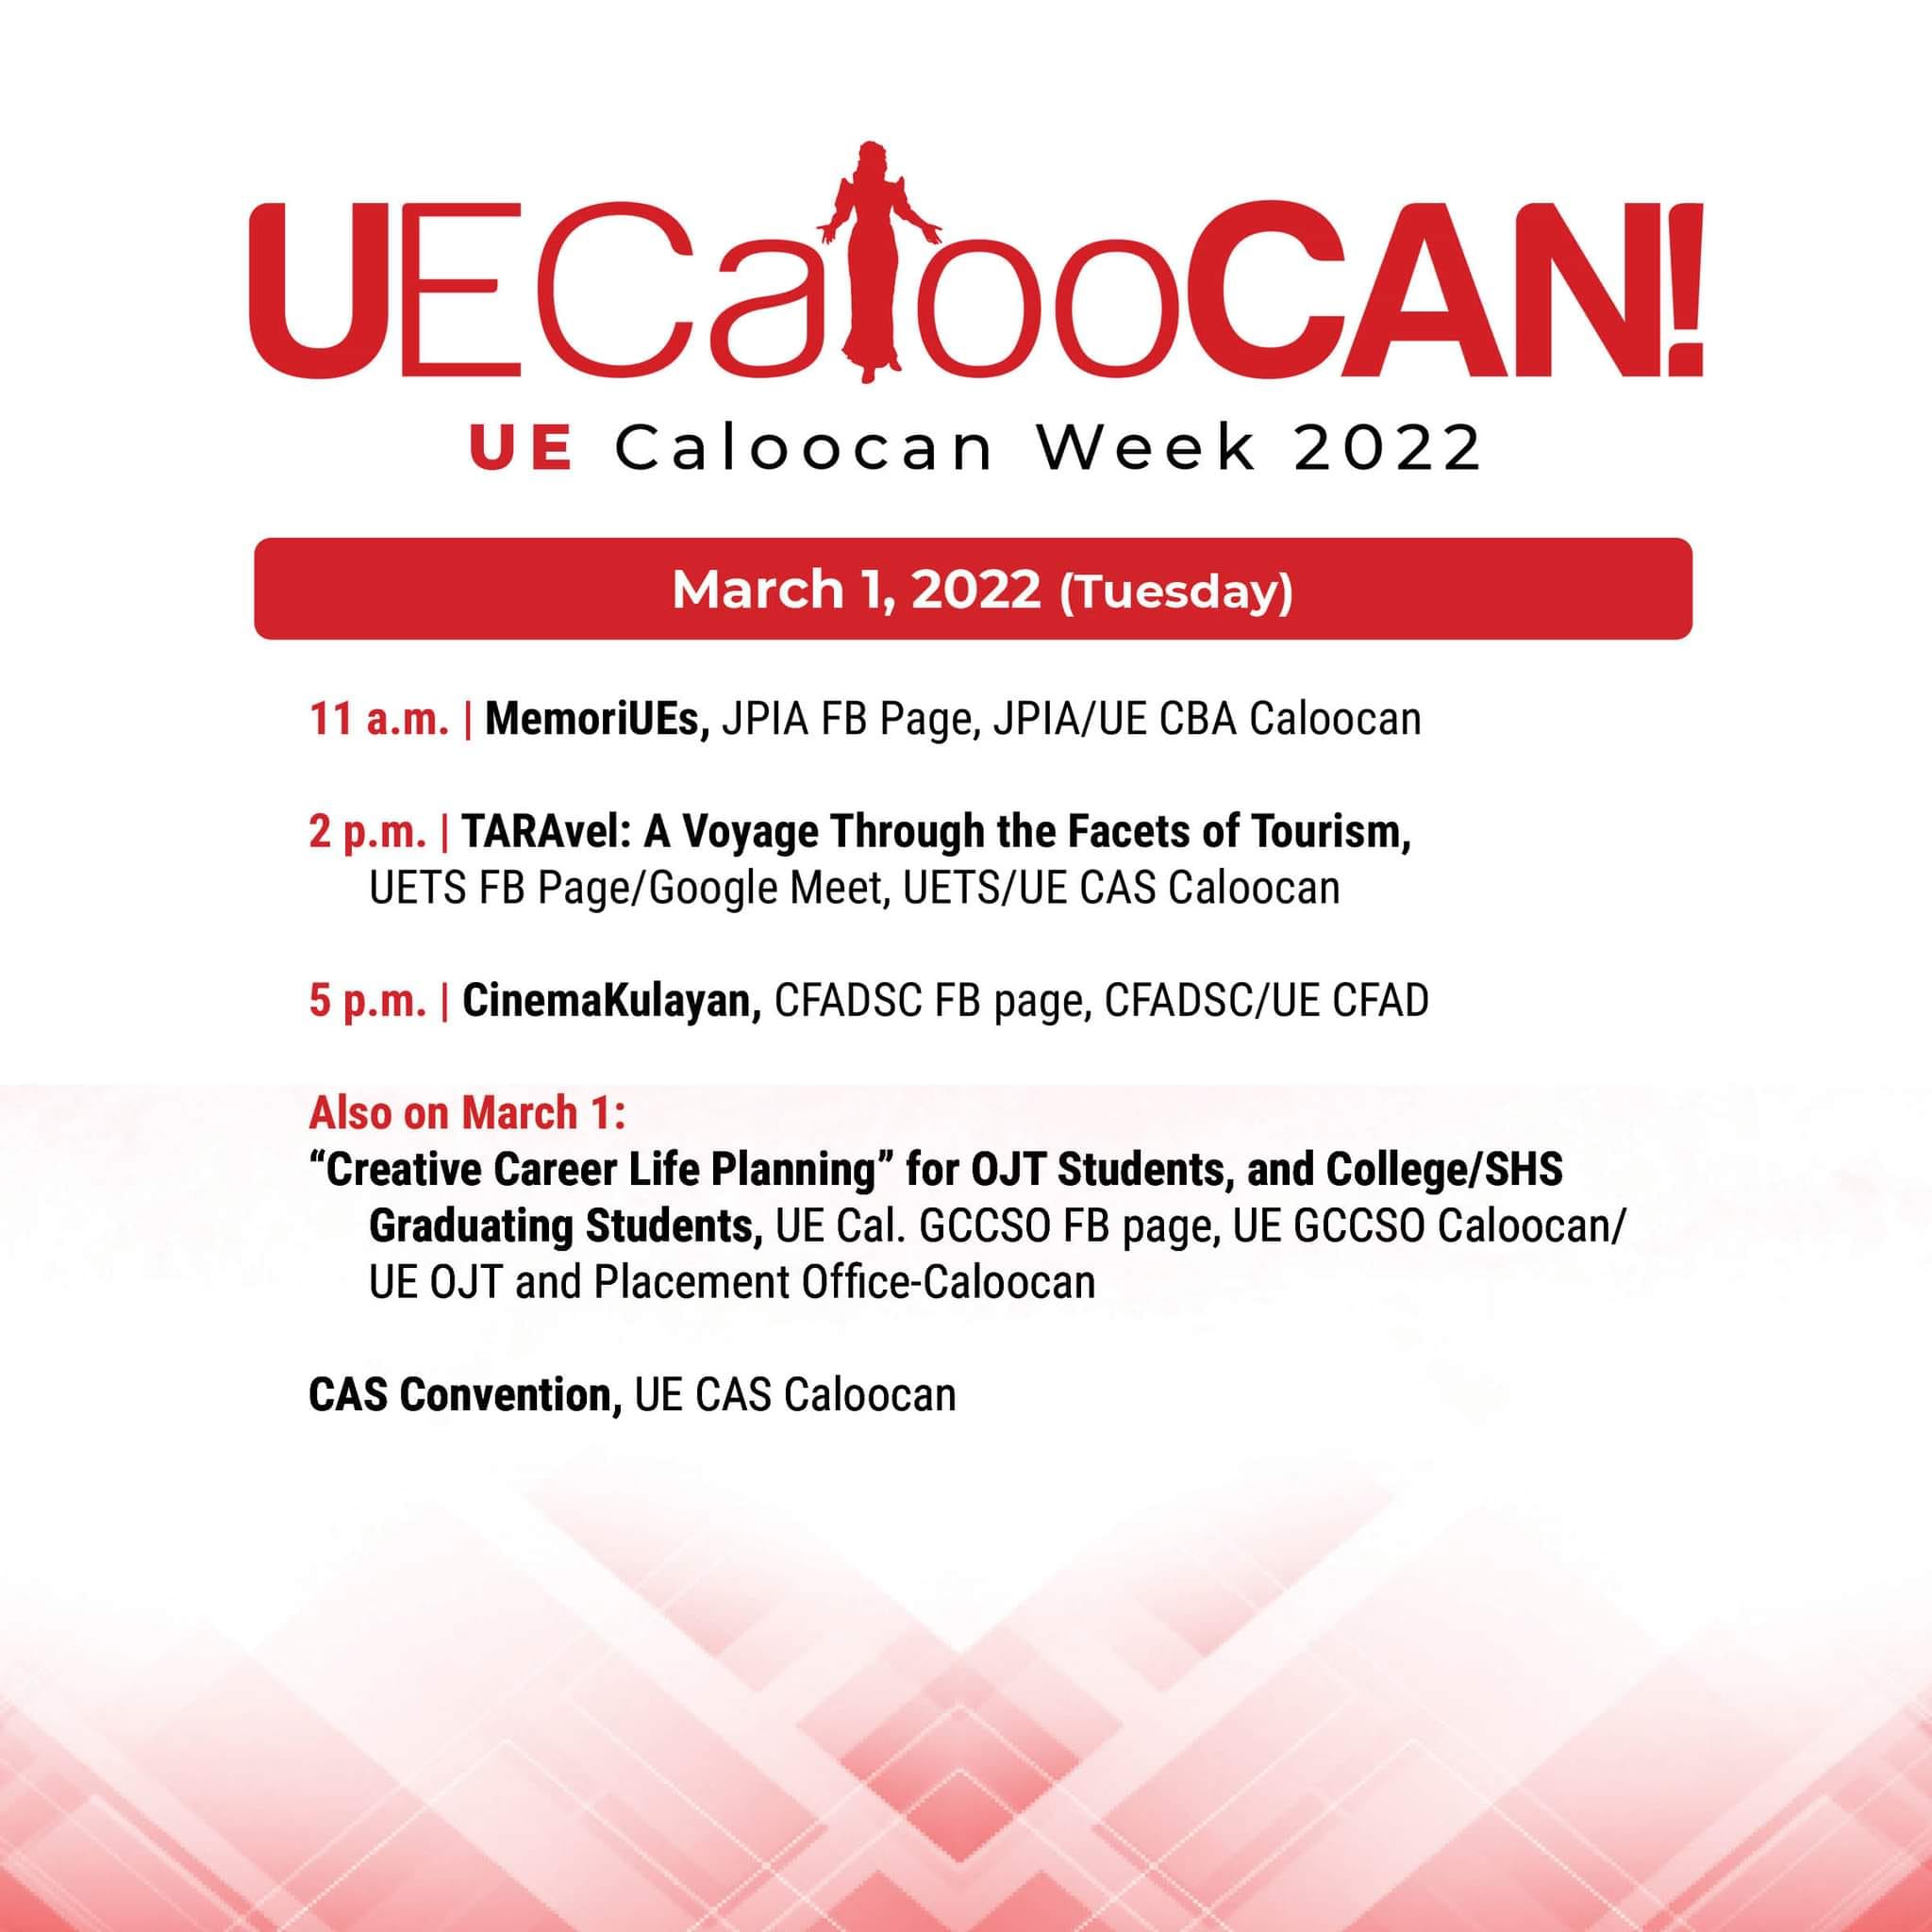 ue-caloocan-week-2022-formally-opens-this-tuesday-university-of-the-east